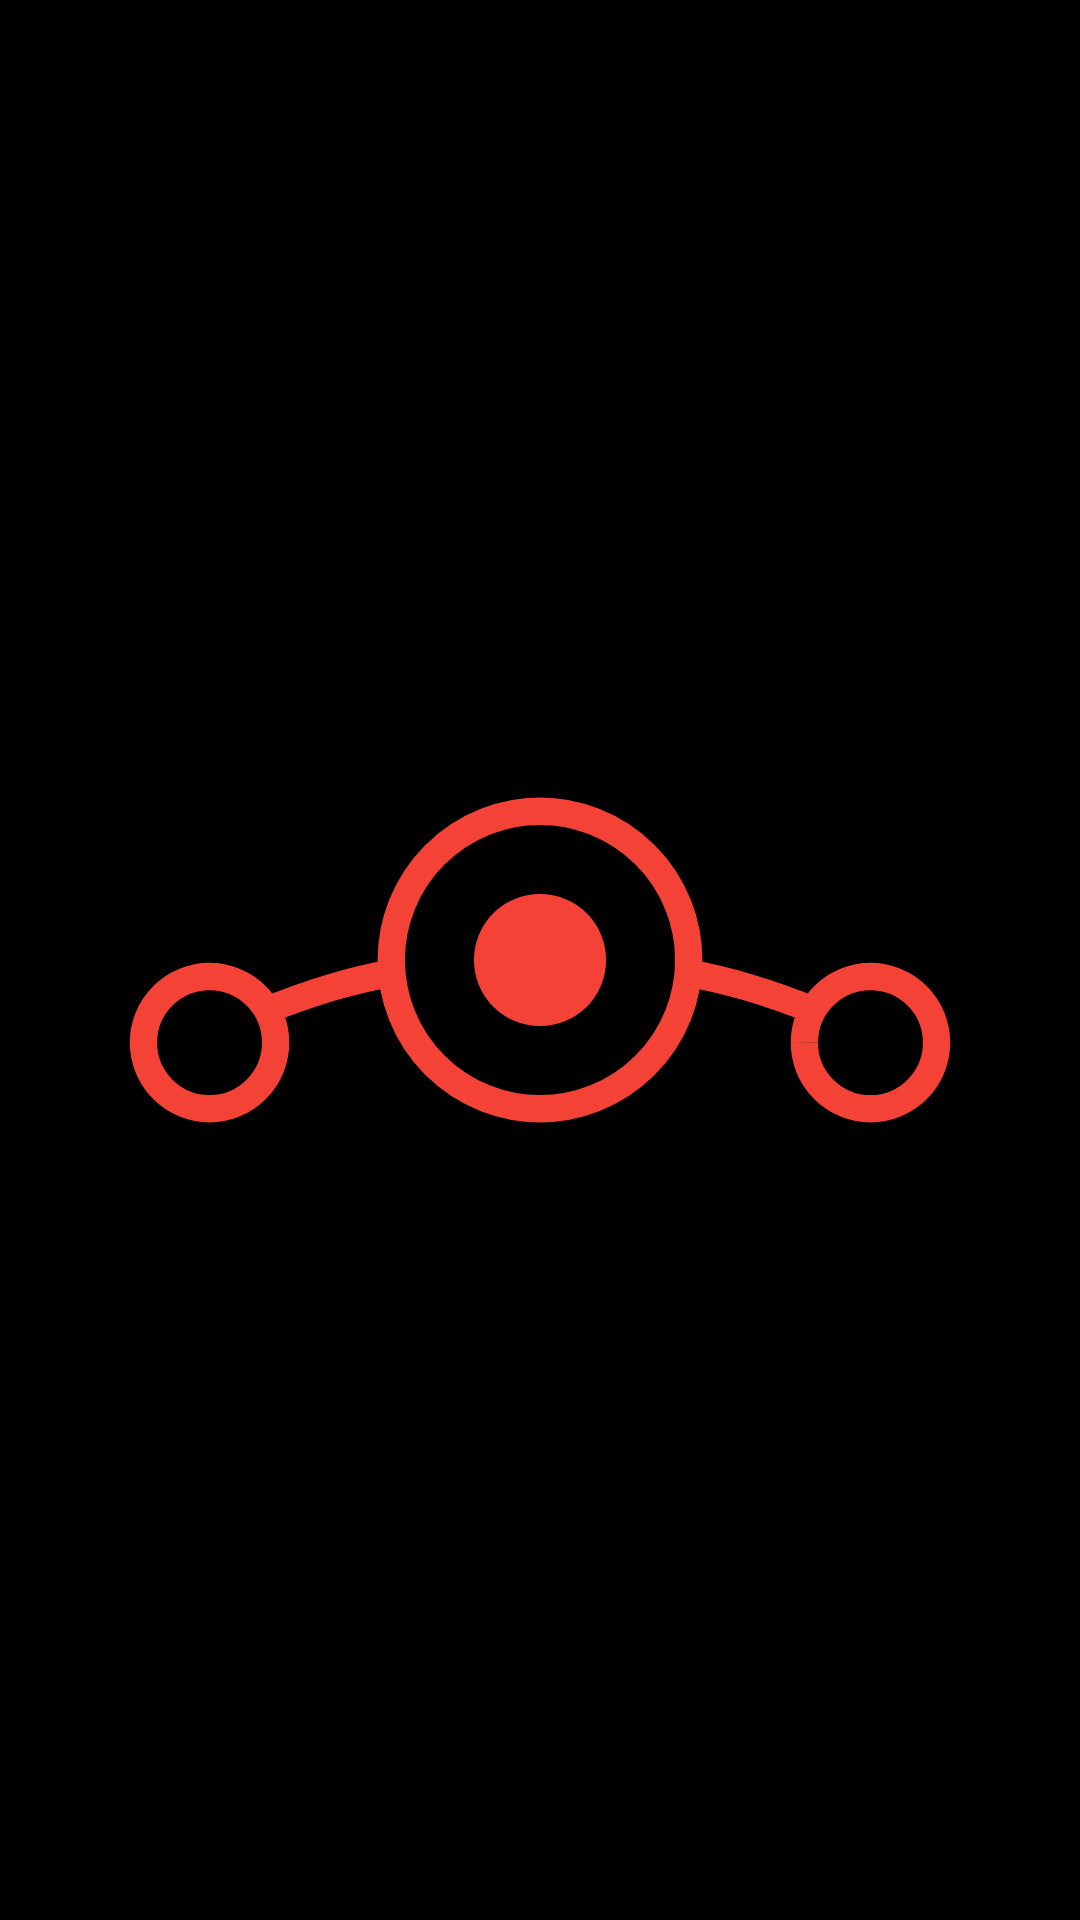 General 1080x1920 black Lineage OS Android (operating system) symbols logo minimalism red digital art